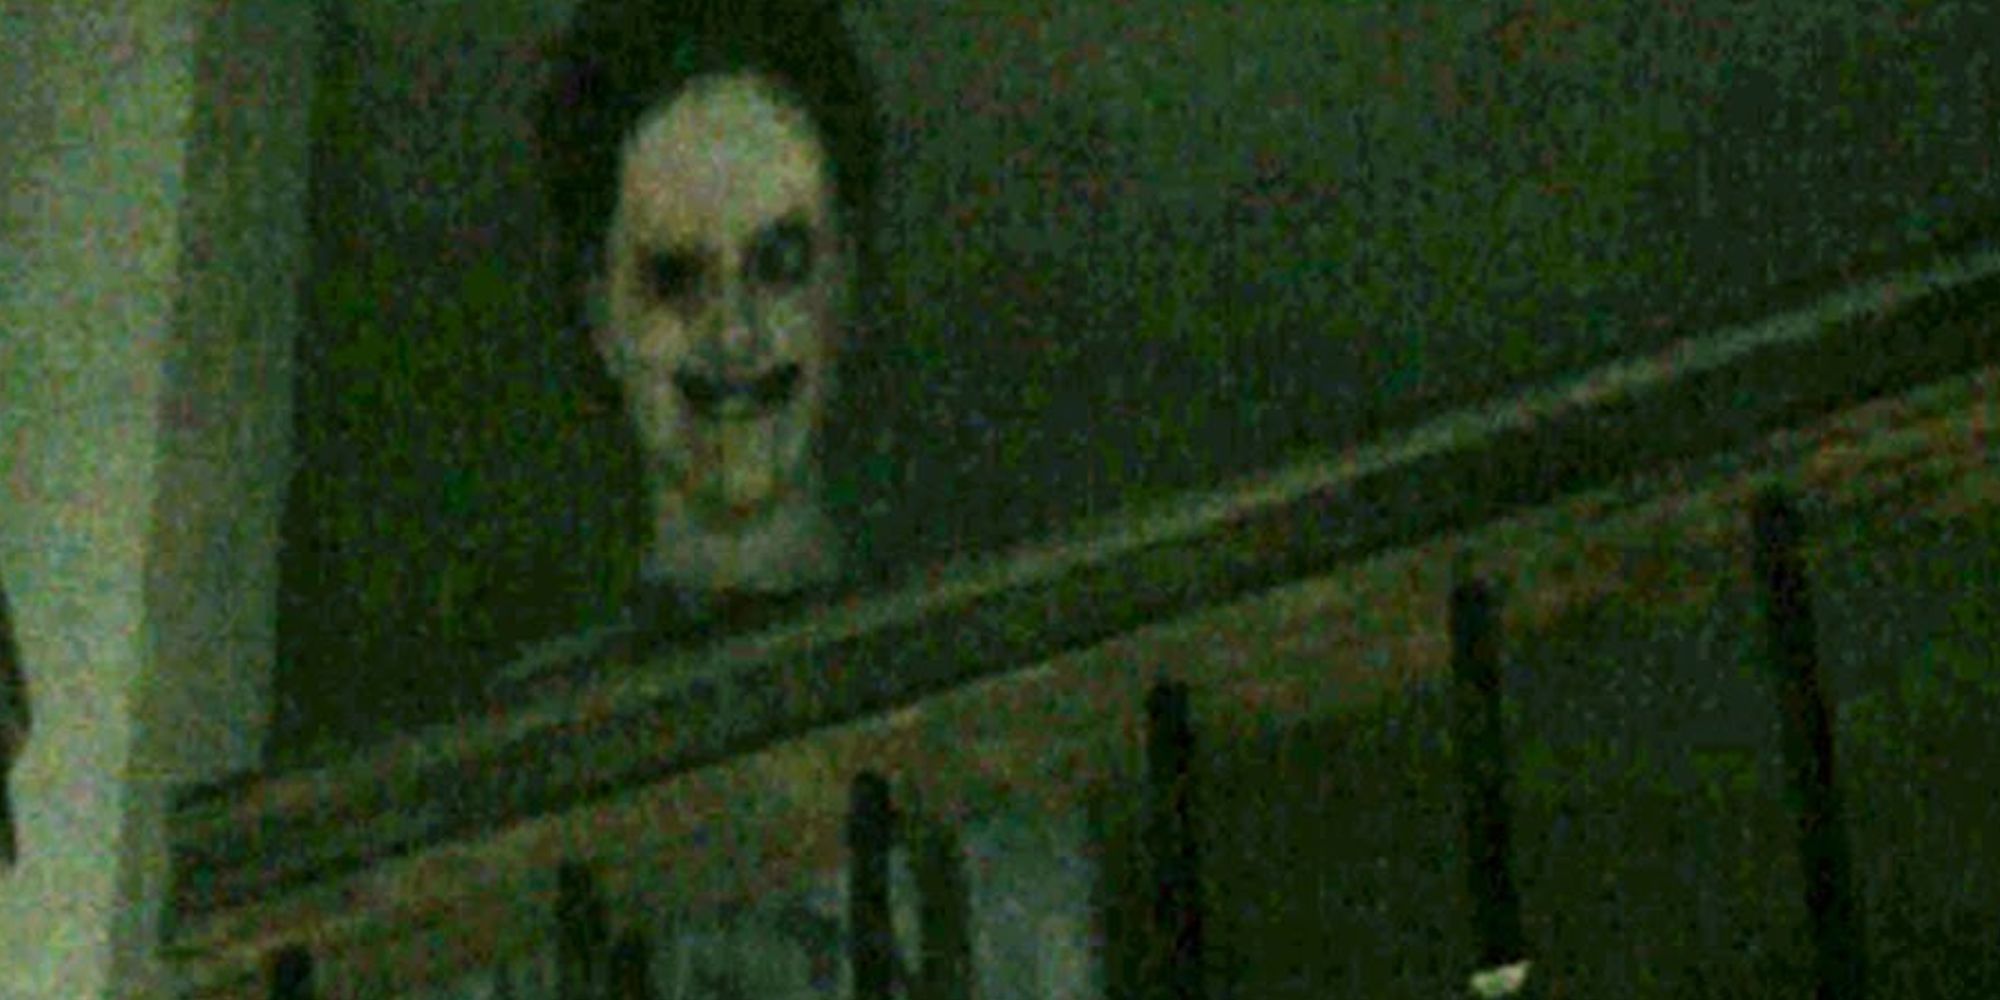 PT Demo Kojima screenshot of a creepy masked figure looking down from a bannister